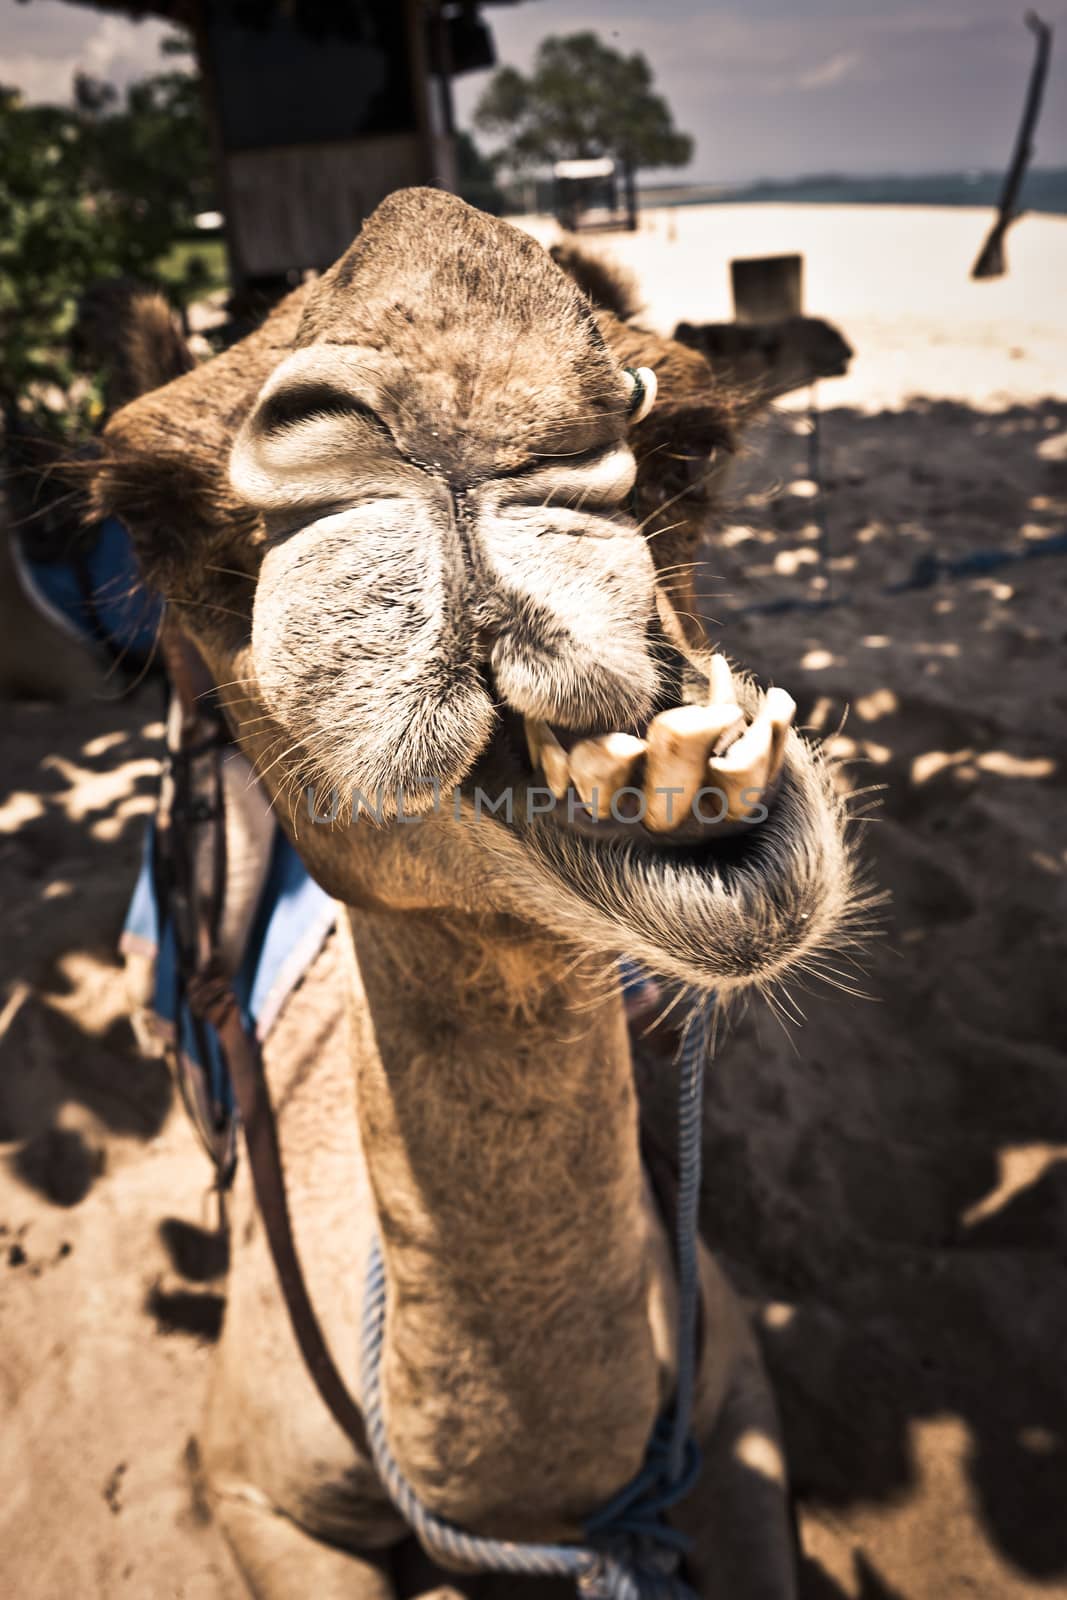 Fun closeup view of the head of a camel grinding its teeth which are exposed to view as it faces the camera